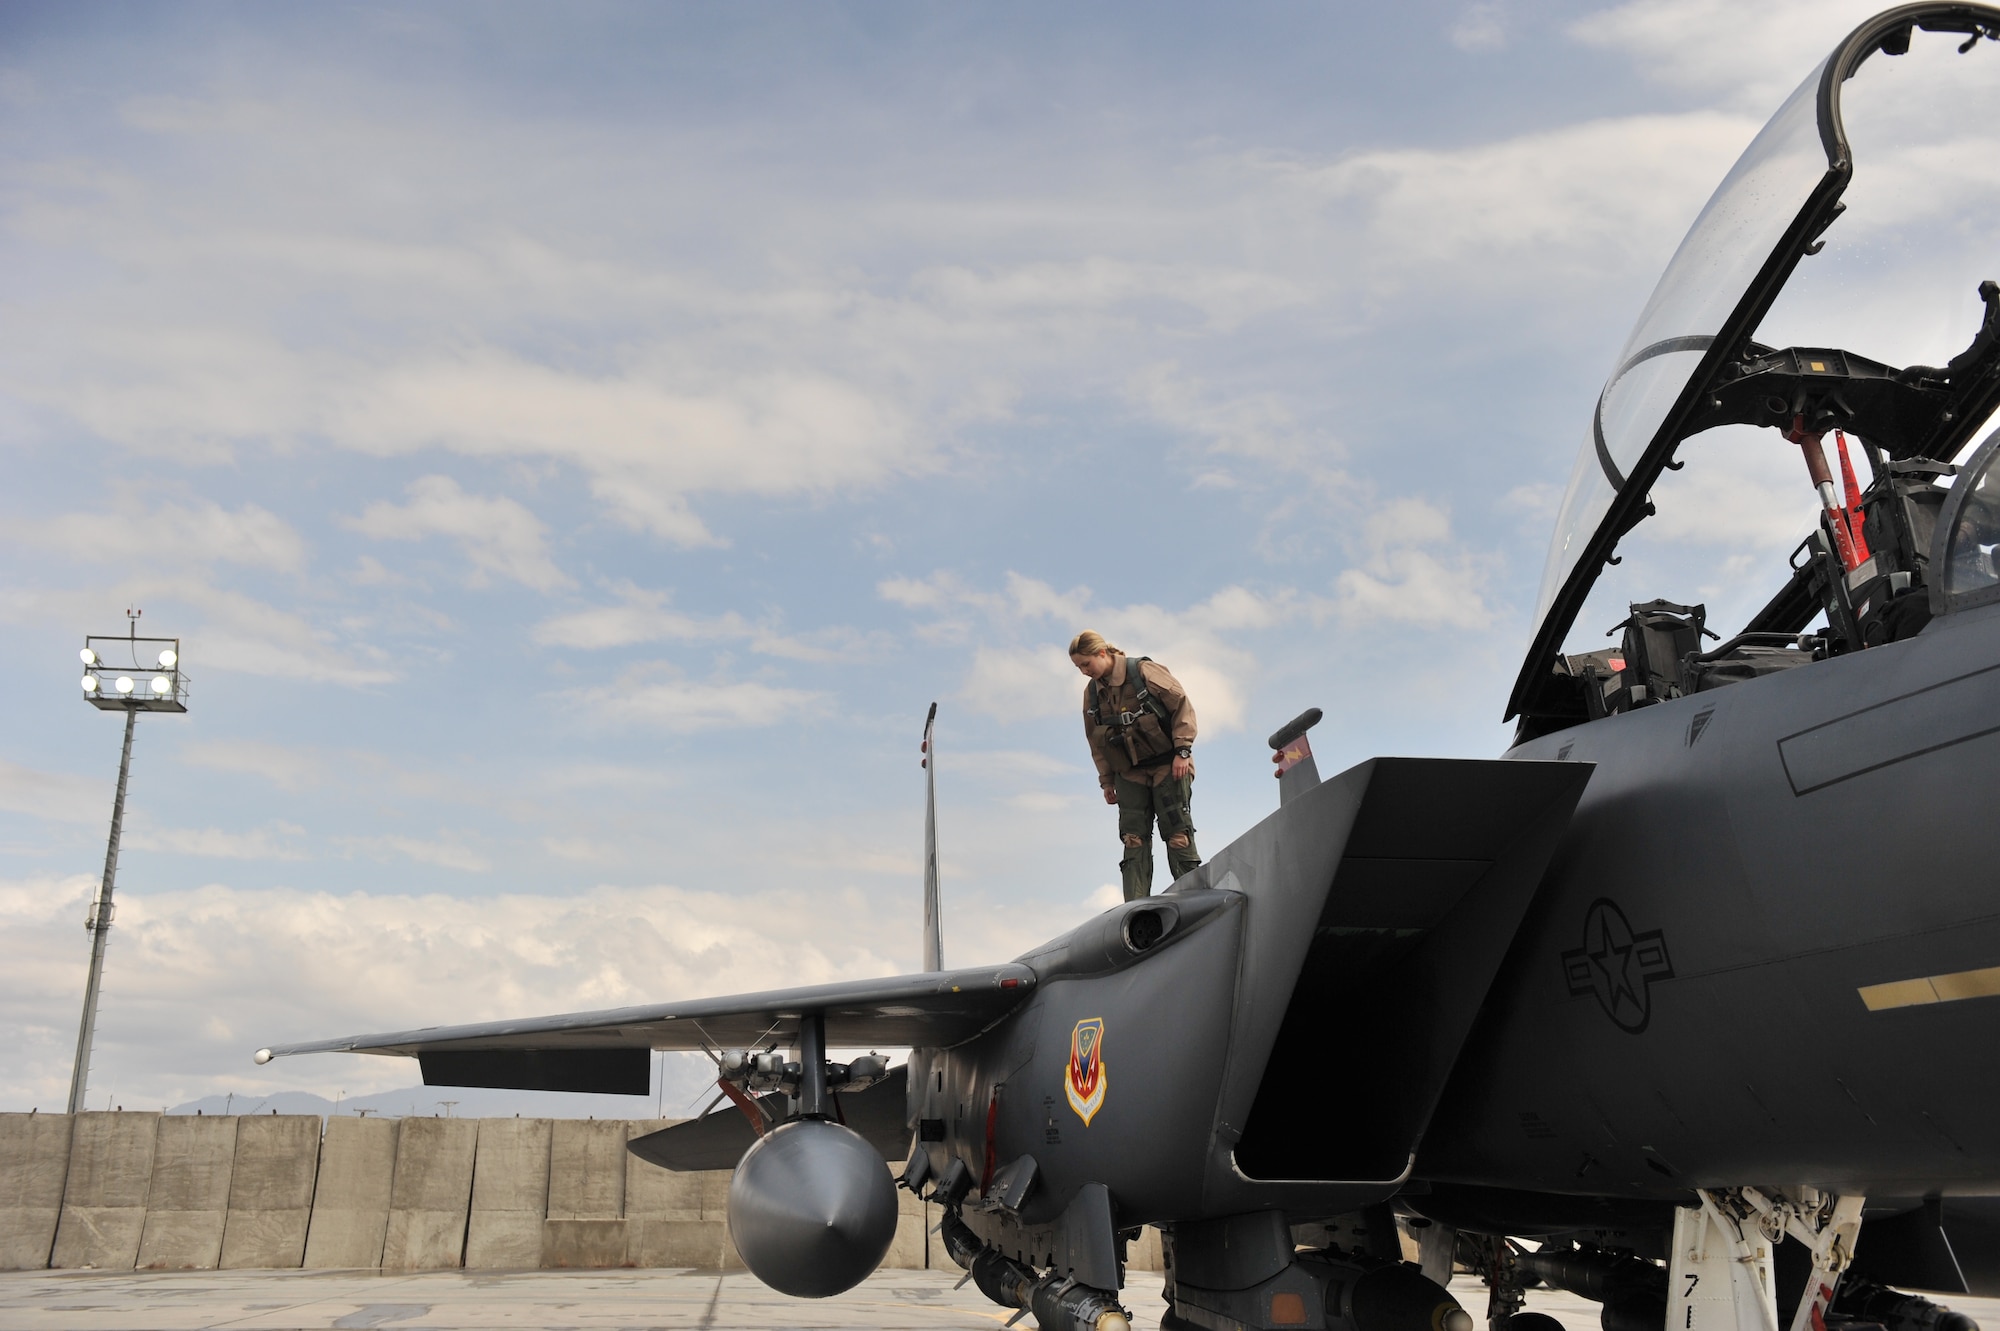 Capt. Jennifer Morton, 389th Expeditionary Fighter Squadron weapons system officer, does a pre-flight inspection before take-off at Bagram Airfield, Afghanistan, March 29, 2011. (U.S. Air Force photo by Senior Airman Sheila deVera)